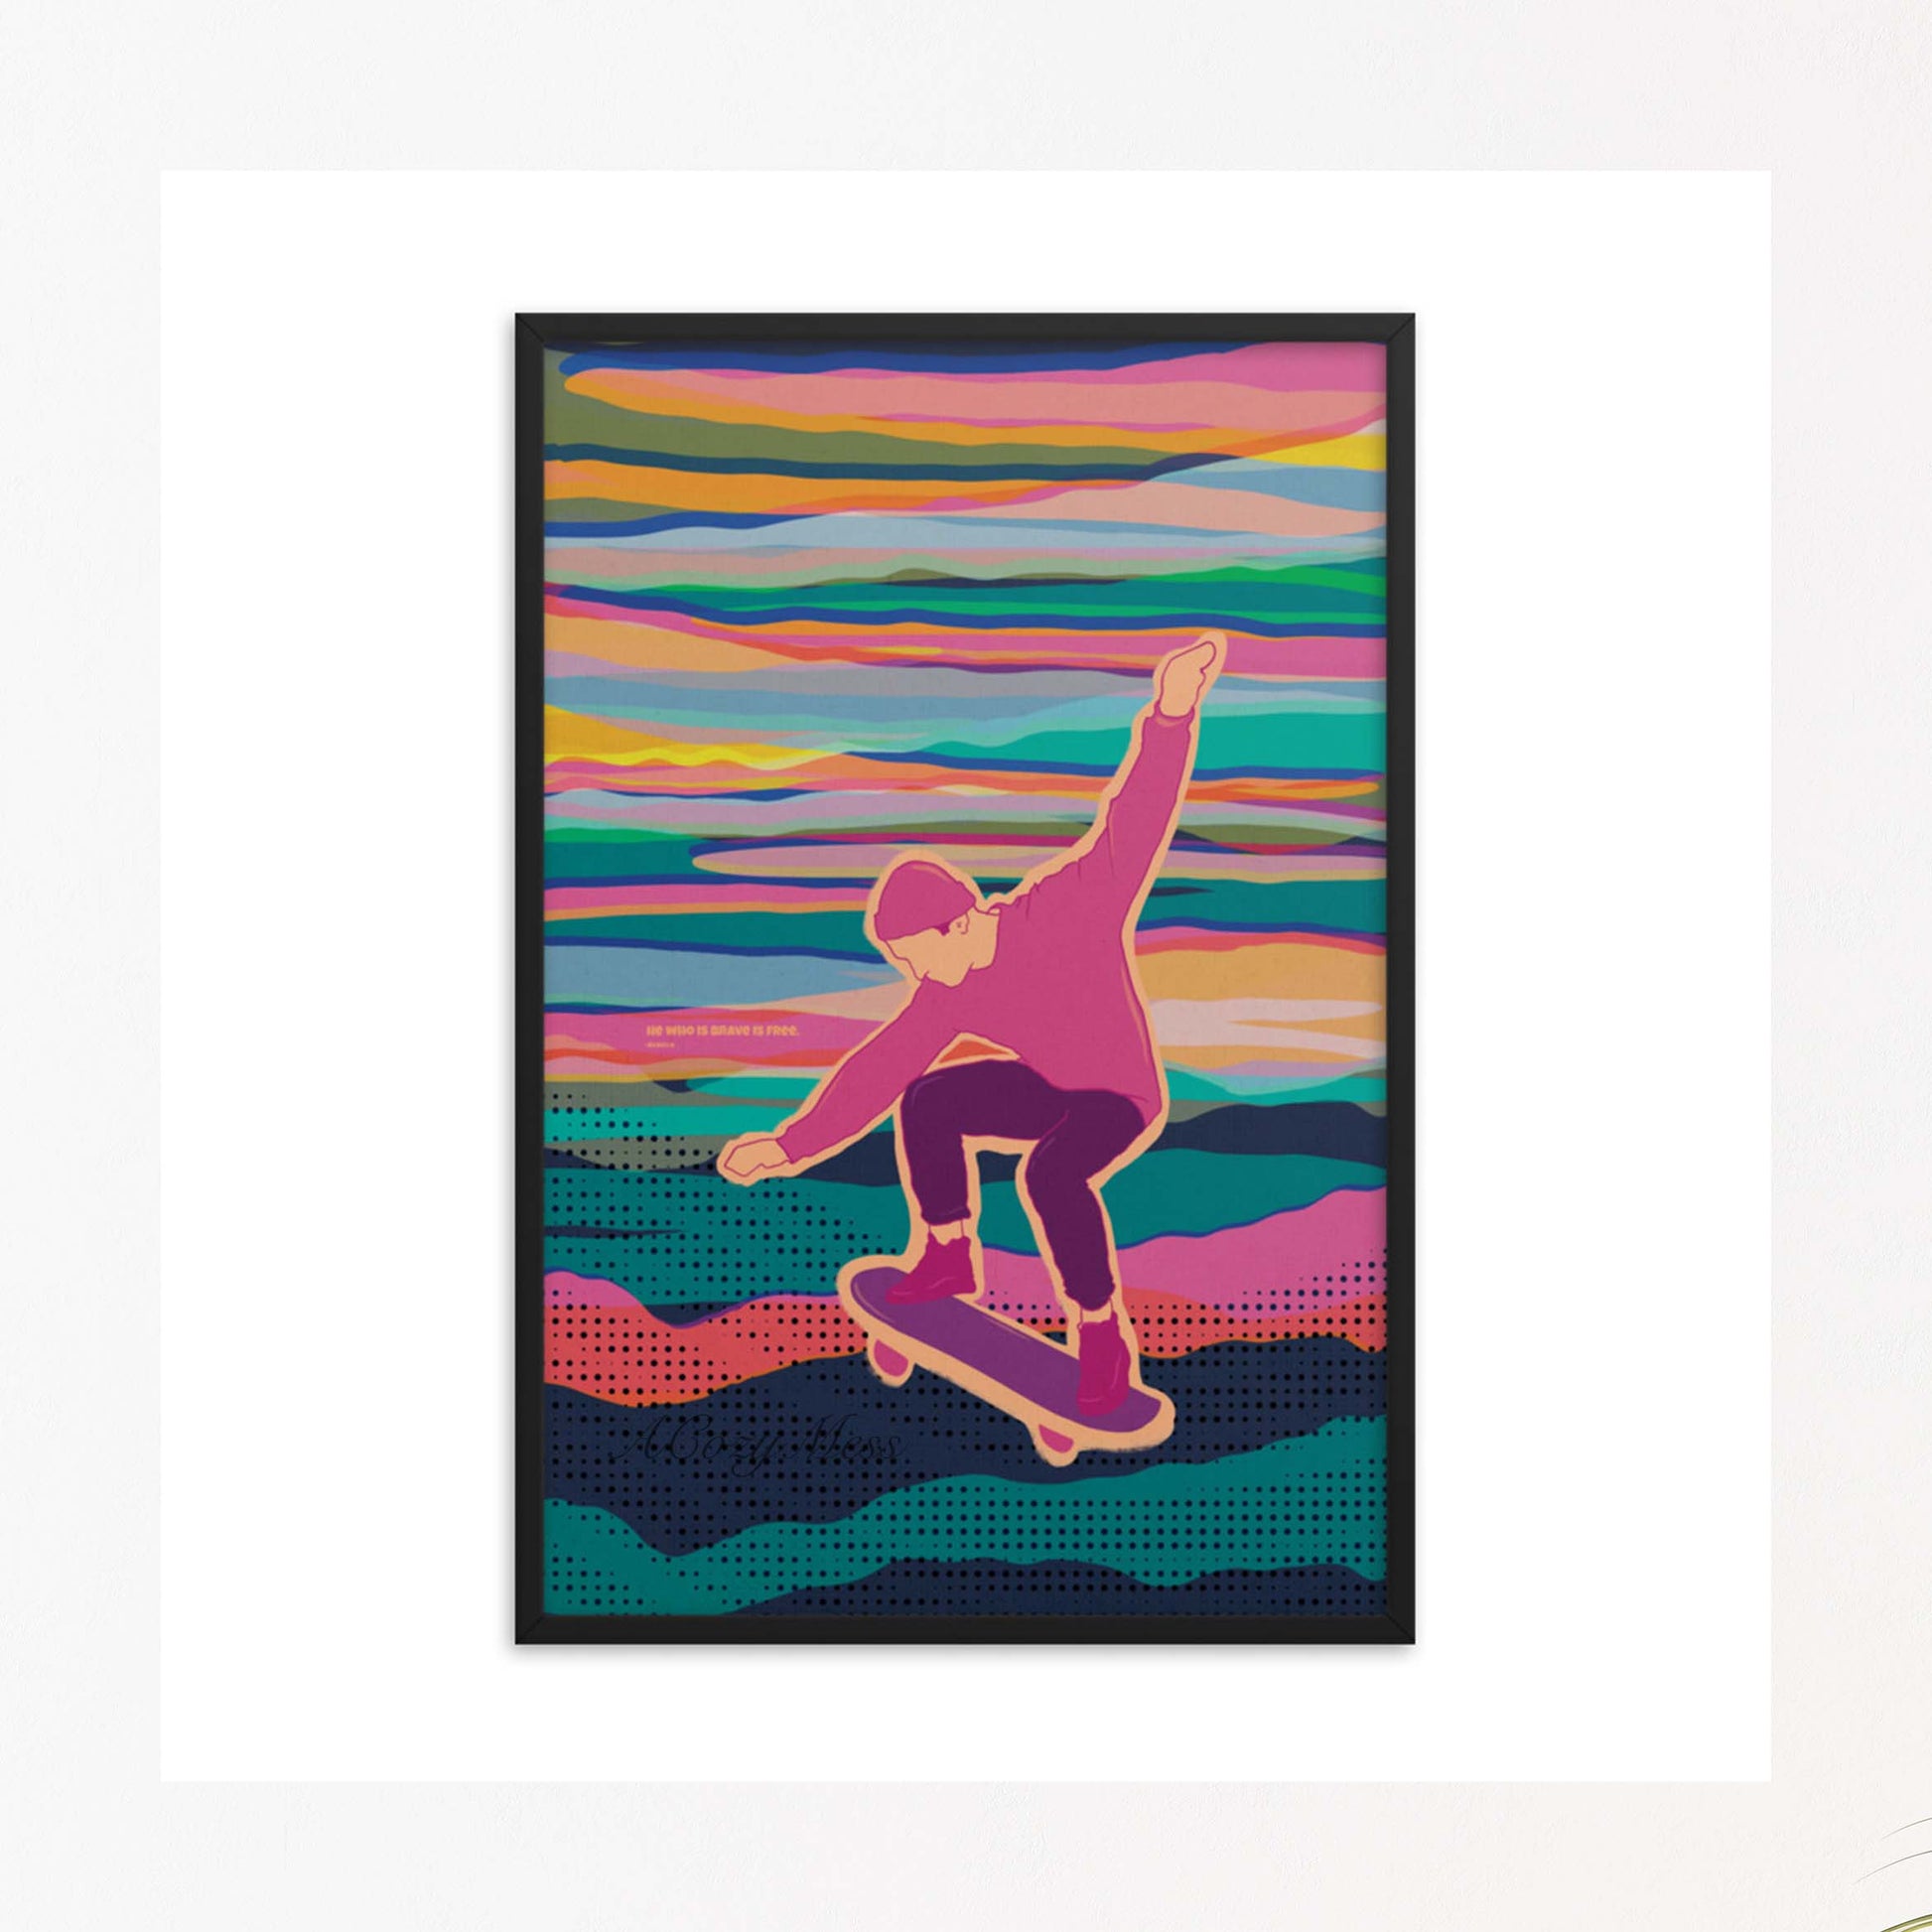 Vibrant & colorful skateboarder art with seneca quote " he who is brave is free" in black frame